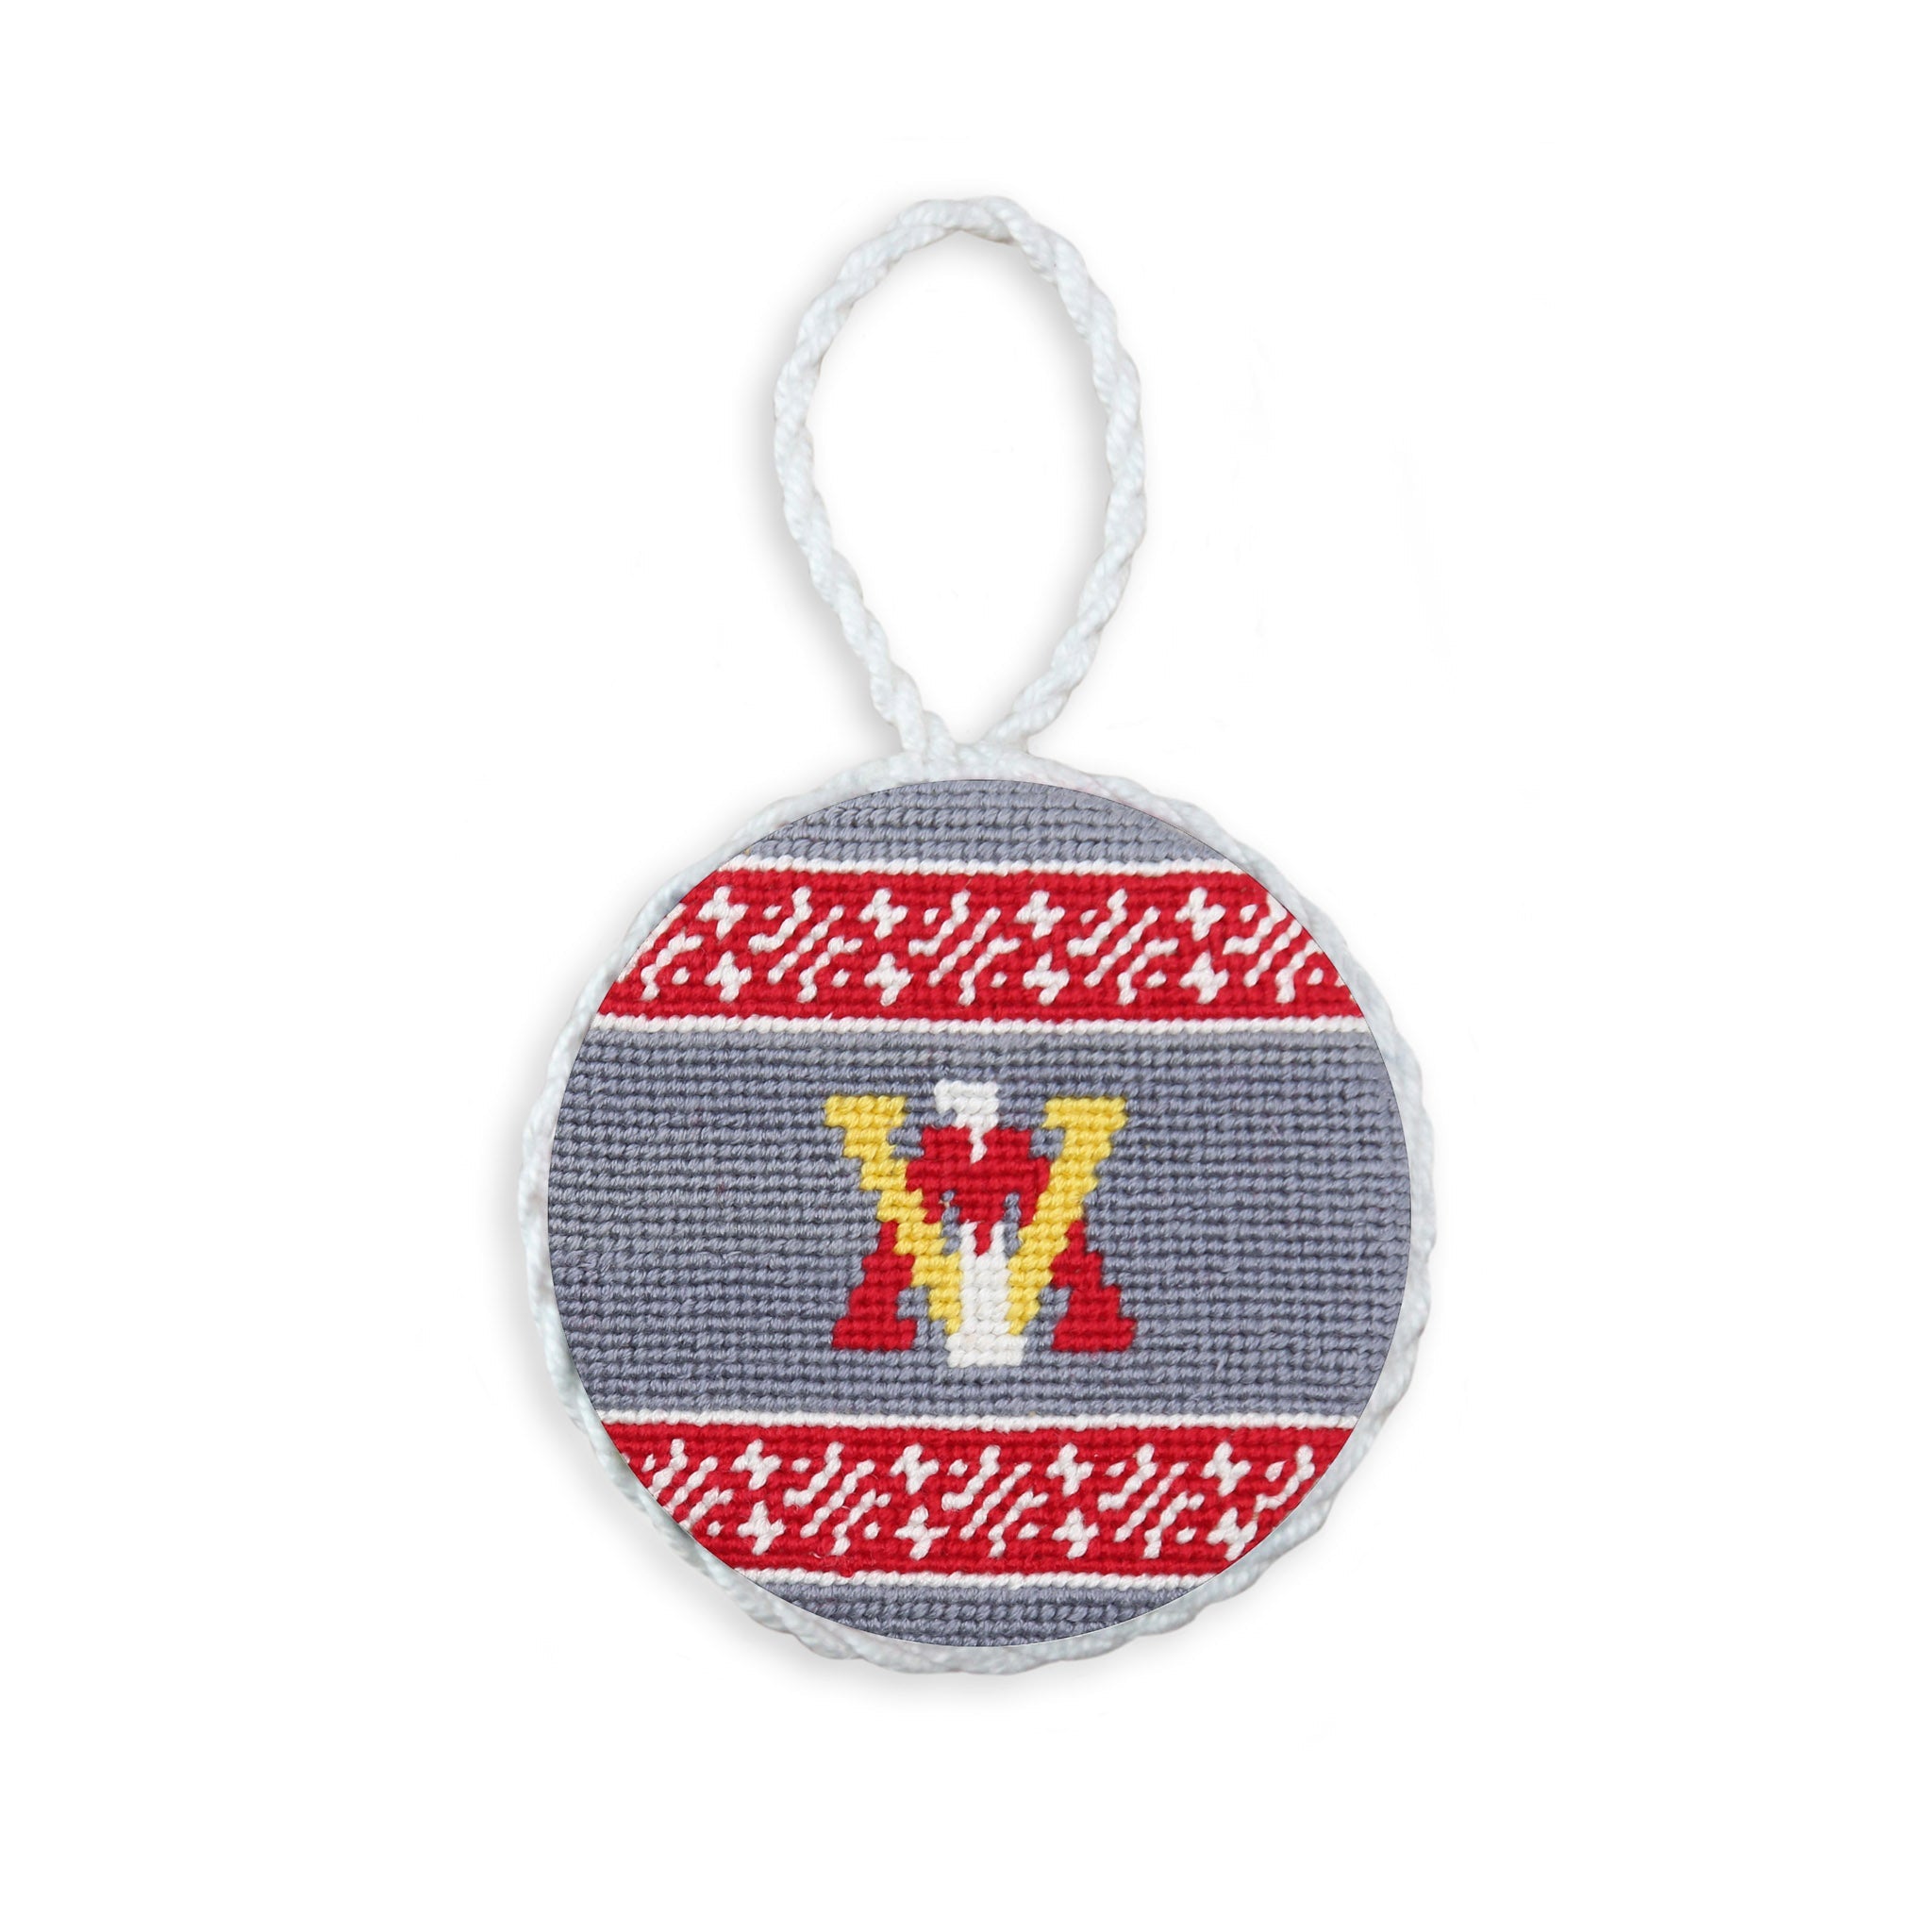 Smathers and Branson VMI Needlepoint Ornament 